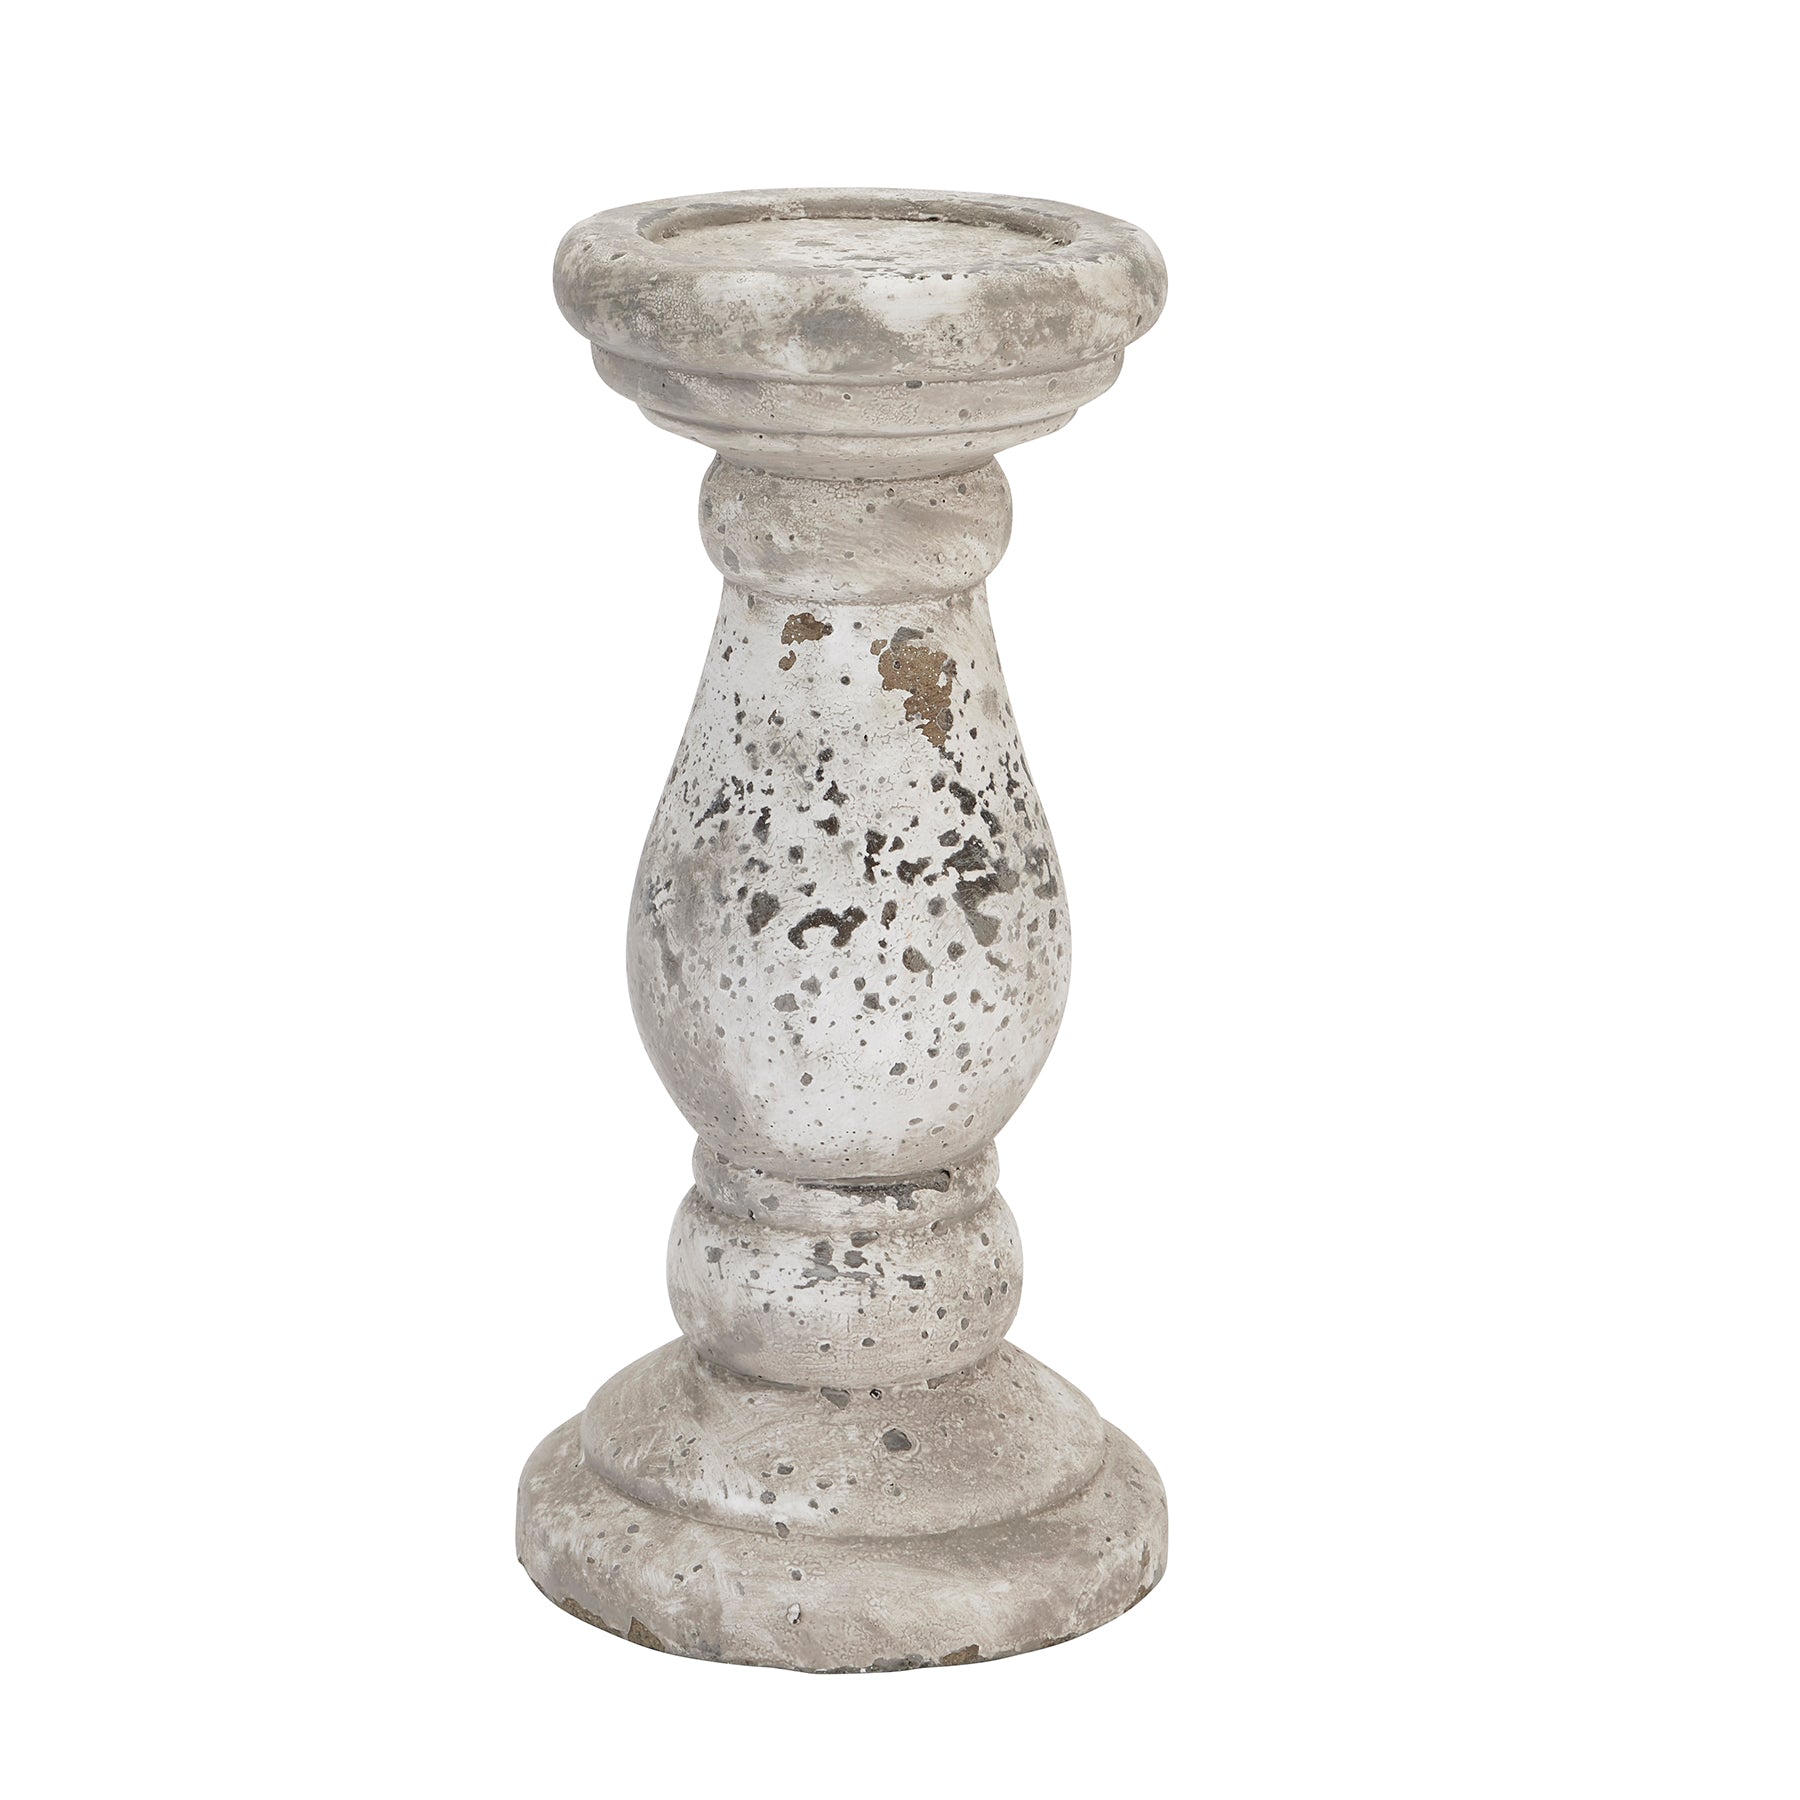 View Stone Ceramic Candle Holder information